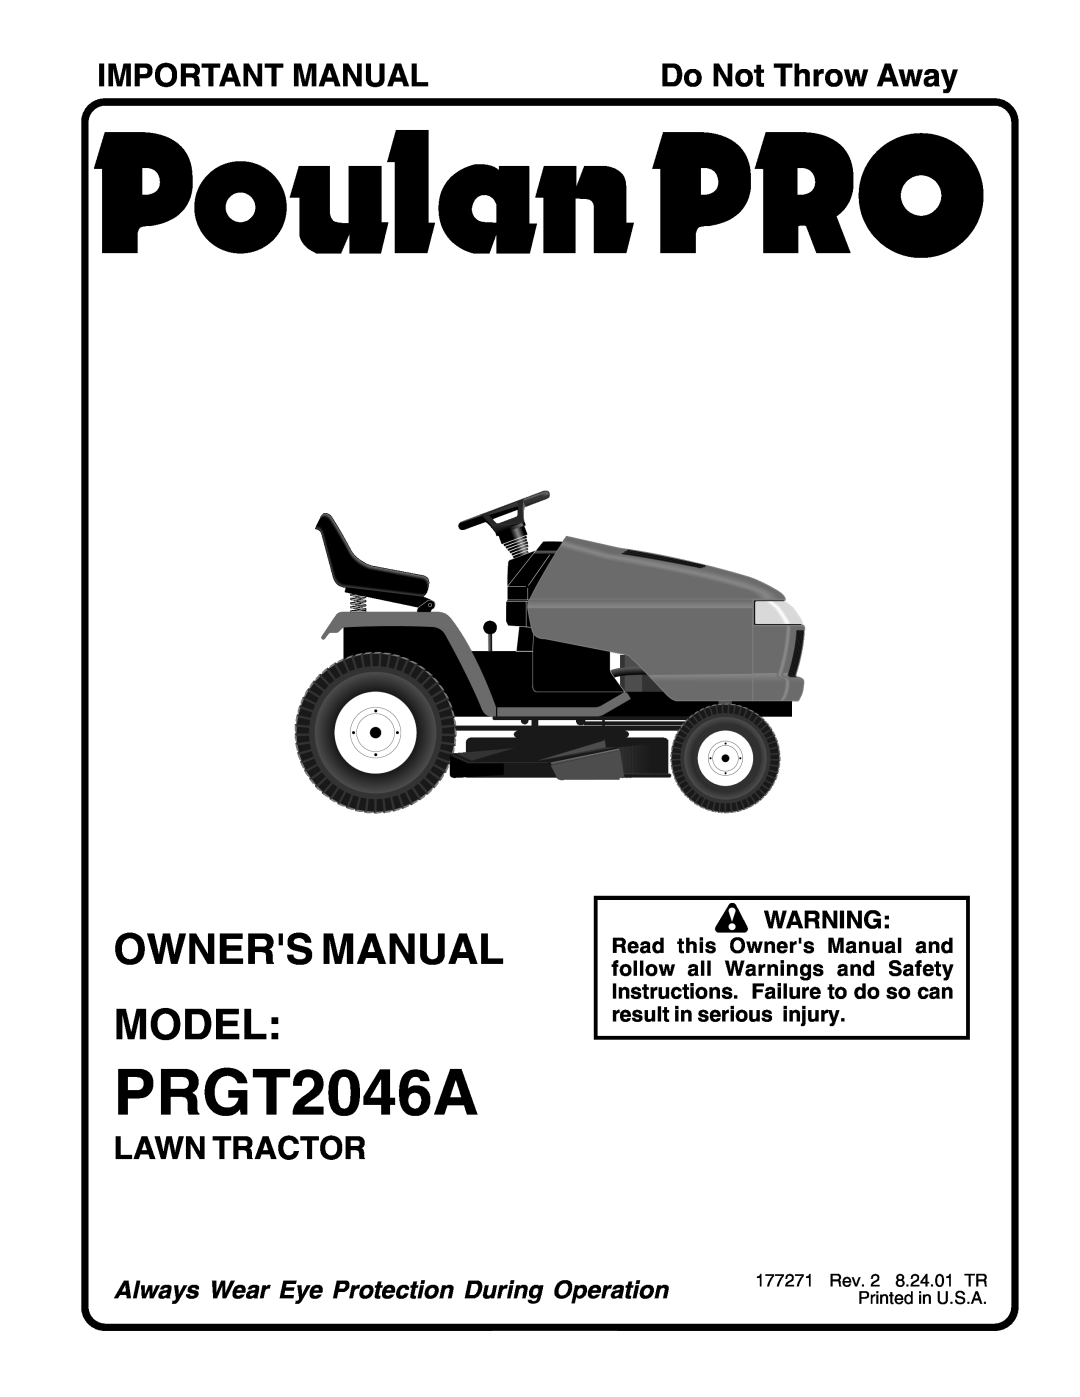 Poulan 177271 owner manual Owners Manual Model, Important Manual, Lawn Tractor, PRGT2046A, Do Not Throw Away 